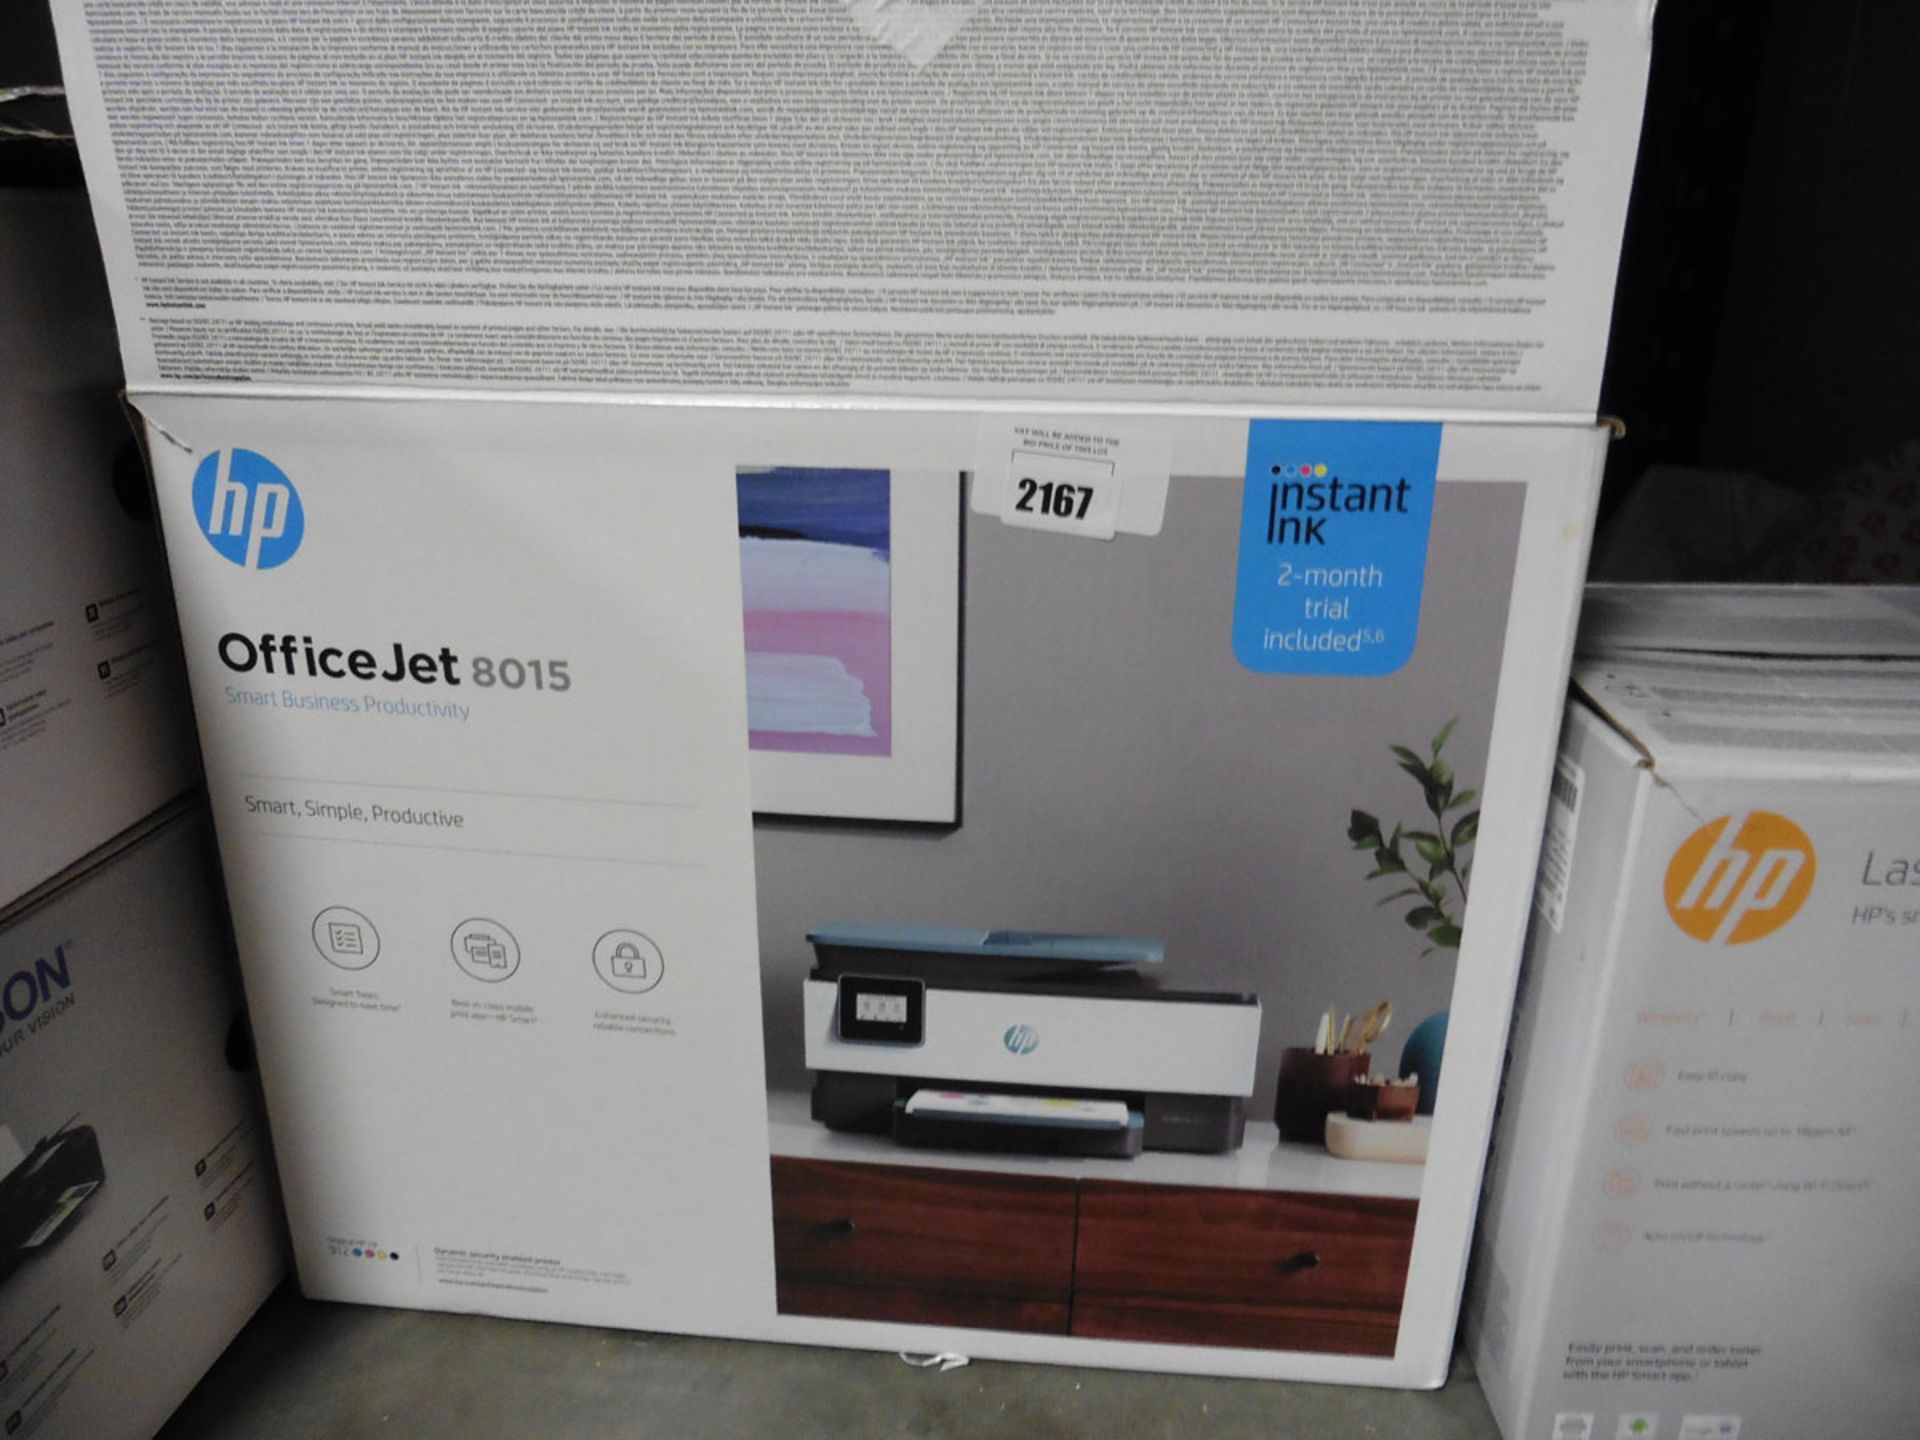 HP Officejet 8015 all in one printer with box